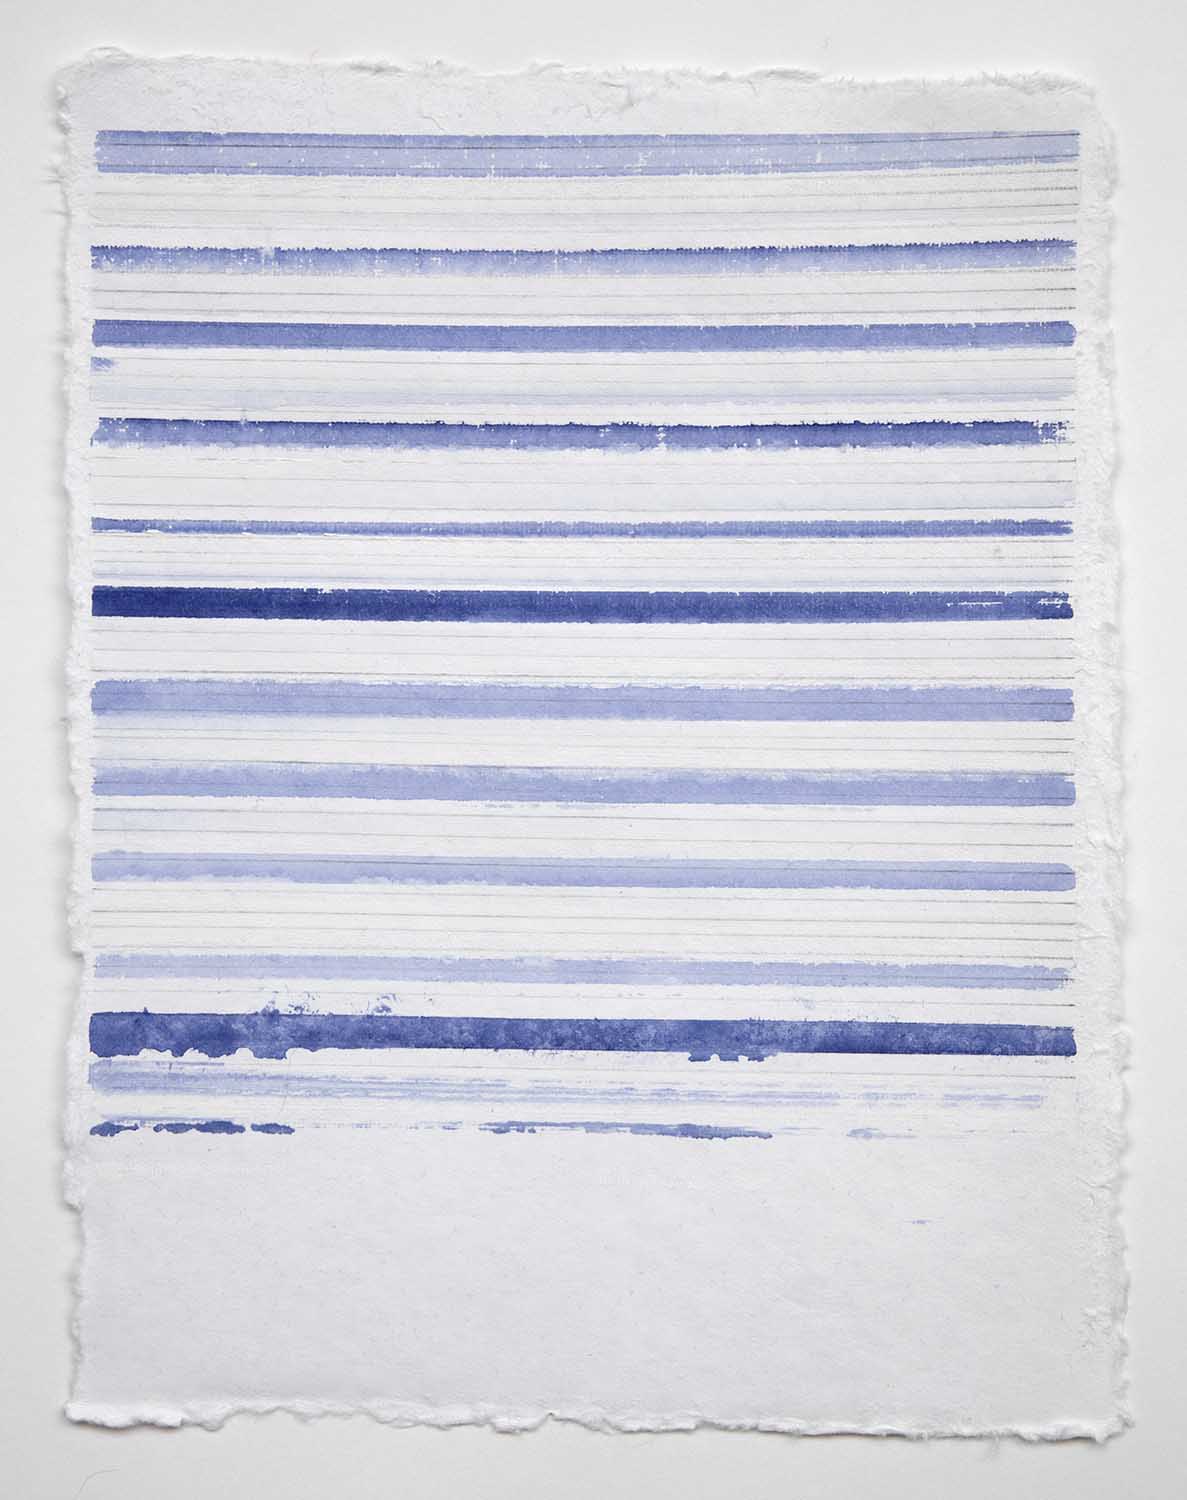 sue carlson more work on paper